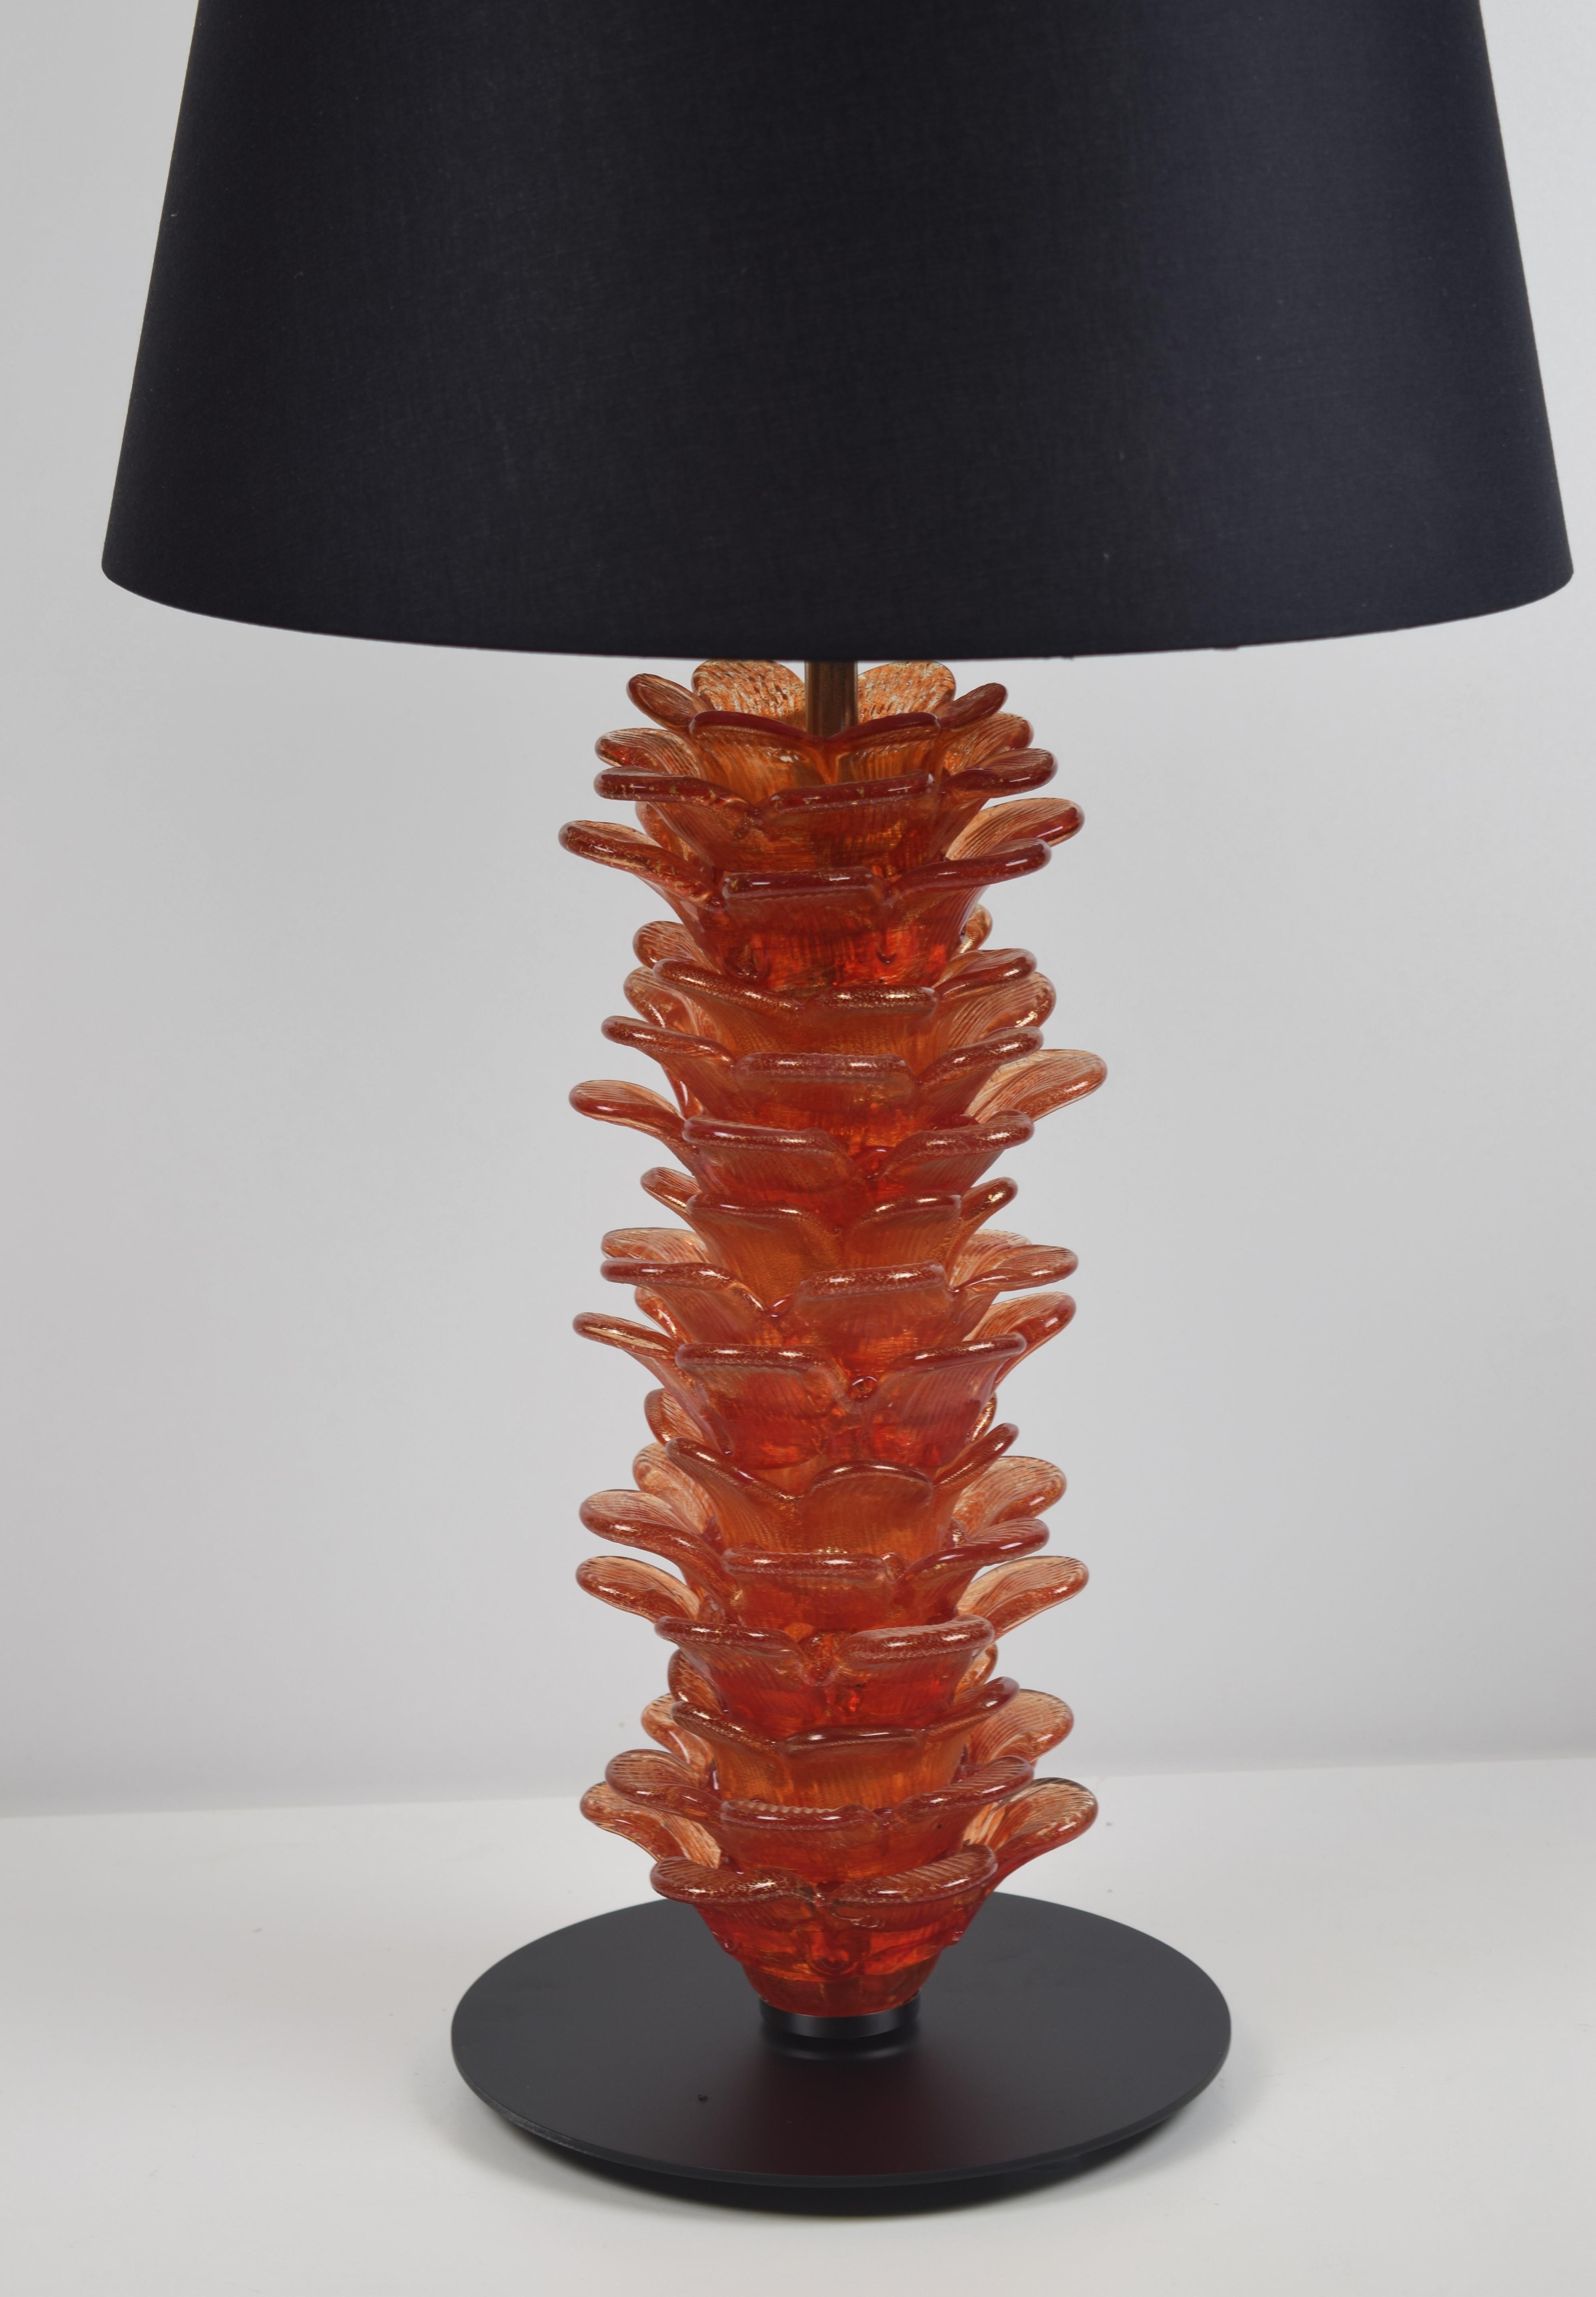 The Flowers collection of table lamps in blown glass represents an absolute novelty in the Eros Raffael production. This Venetian glass table lamp is a unique creation, which embodies the typical production of Murano glass with pure gold leaf.